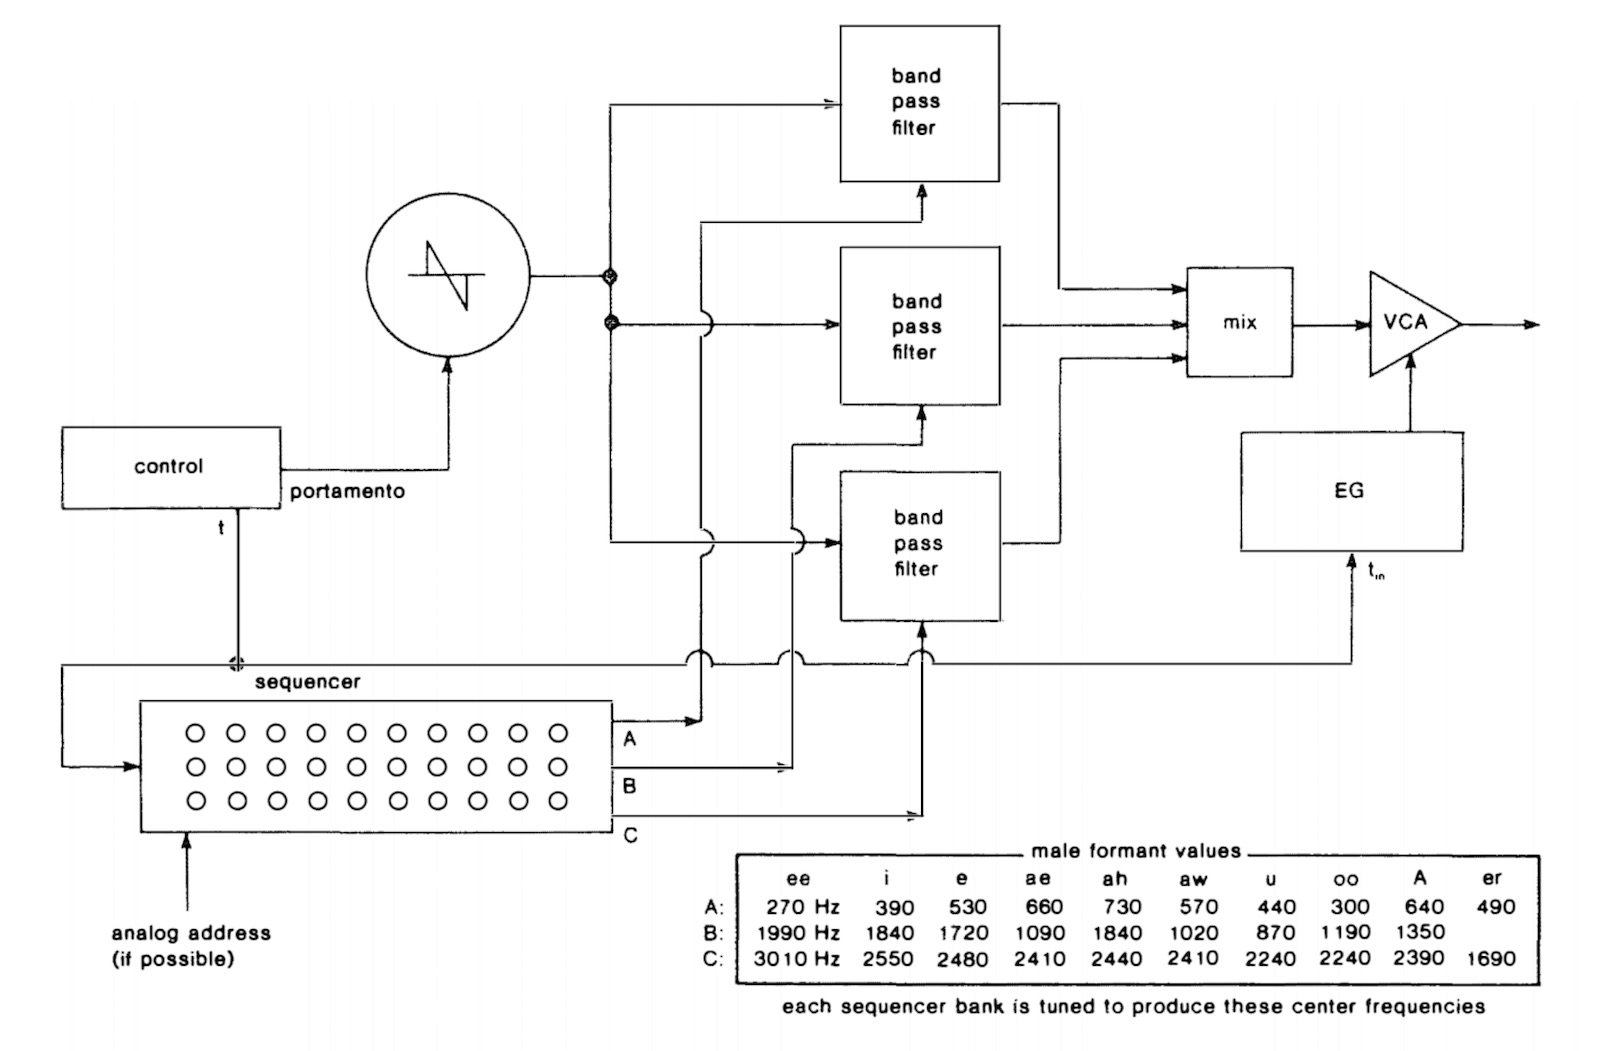 Figure 4 - a patch diagram from Allen Strange's Electronic Music: Systems, Techniques, and Controls